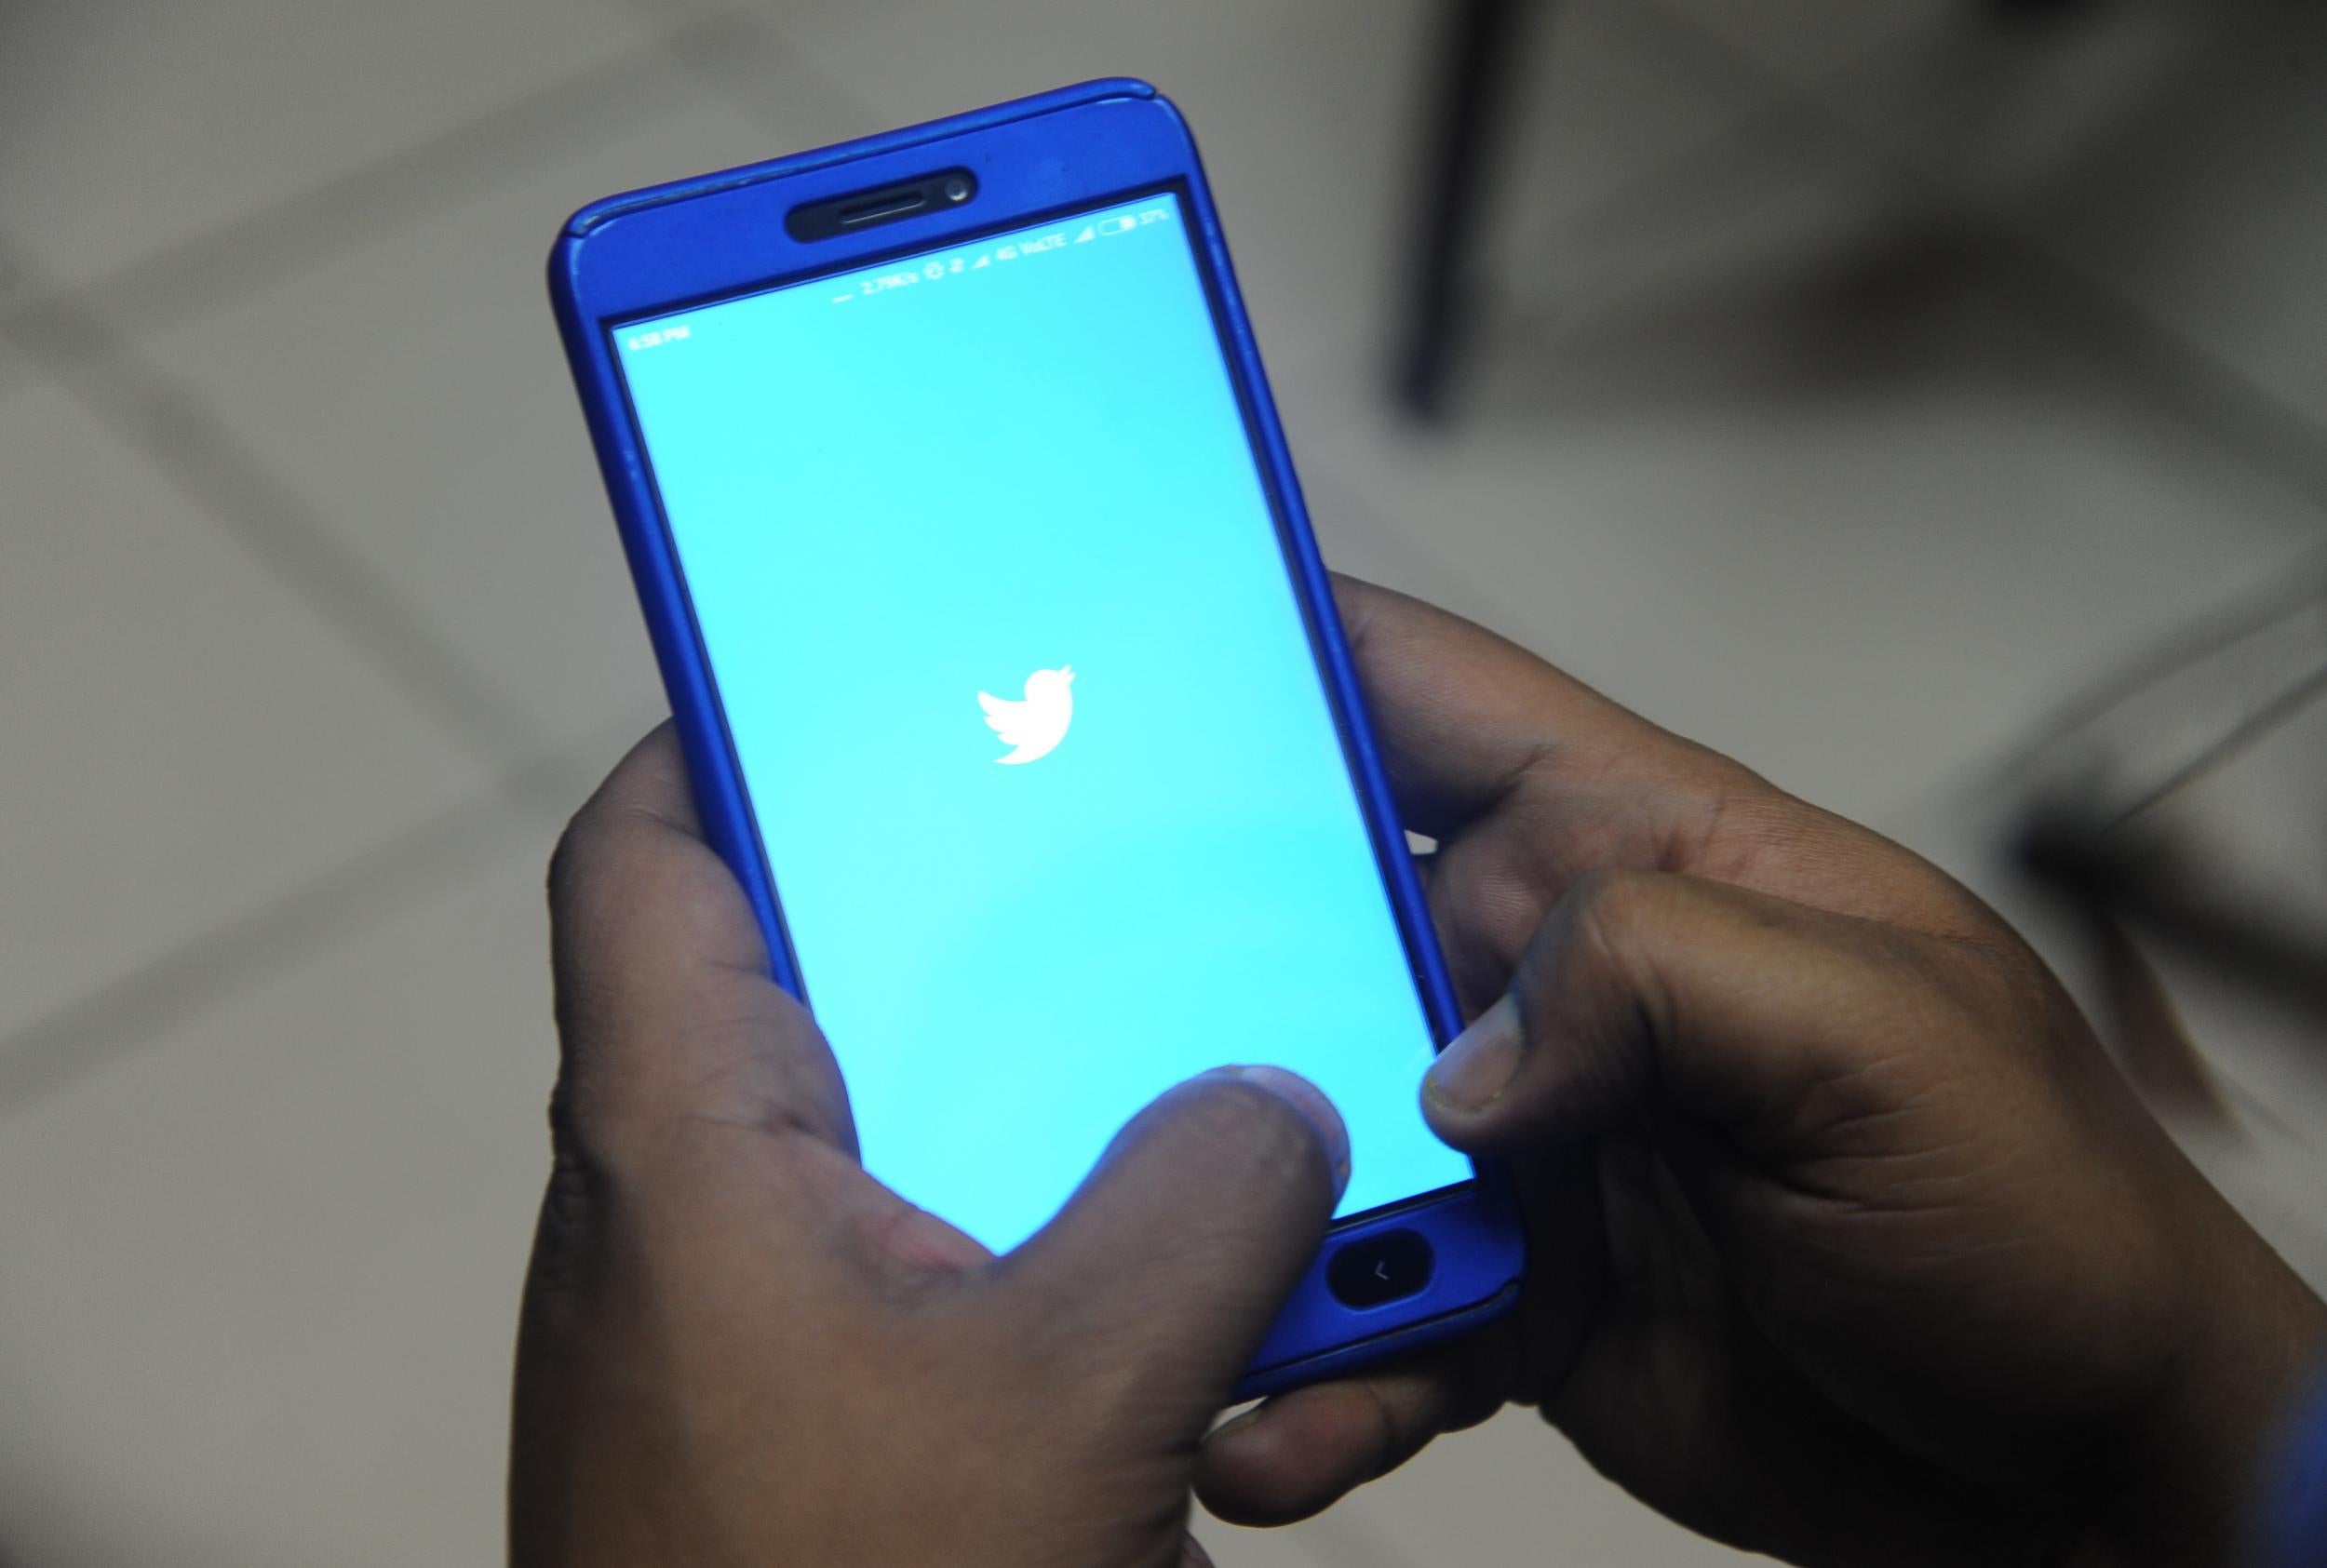 Twitter said the new tool will help users get 'authentic, trustworthy information'